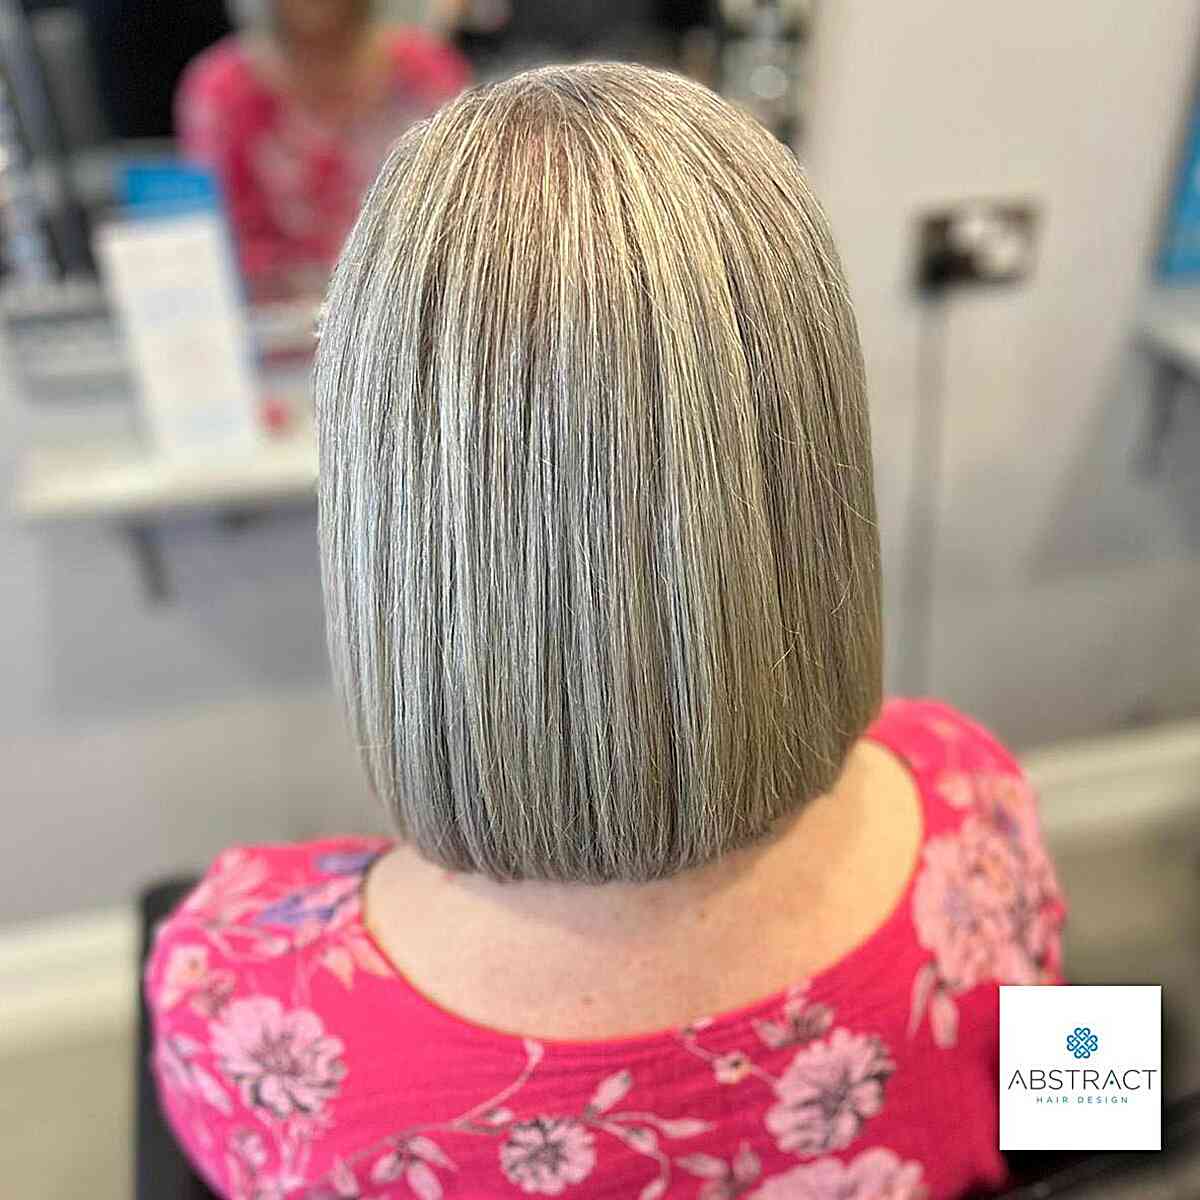 Neck-Length Cut with Warm Grey Hue for Seniors